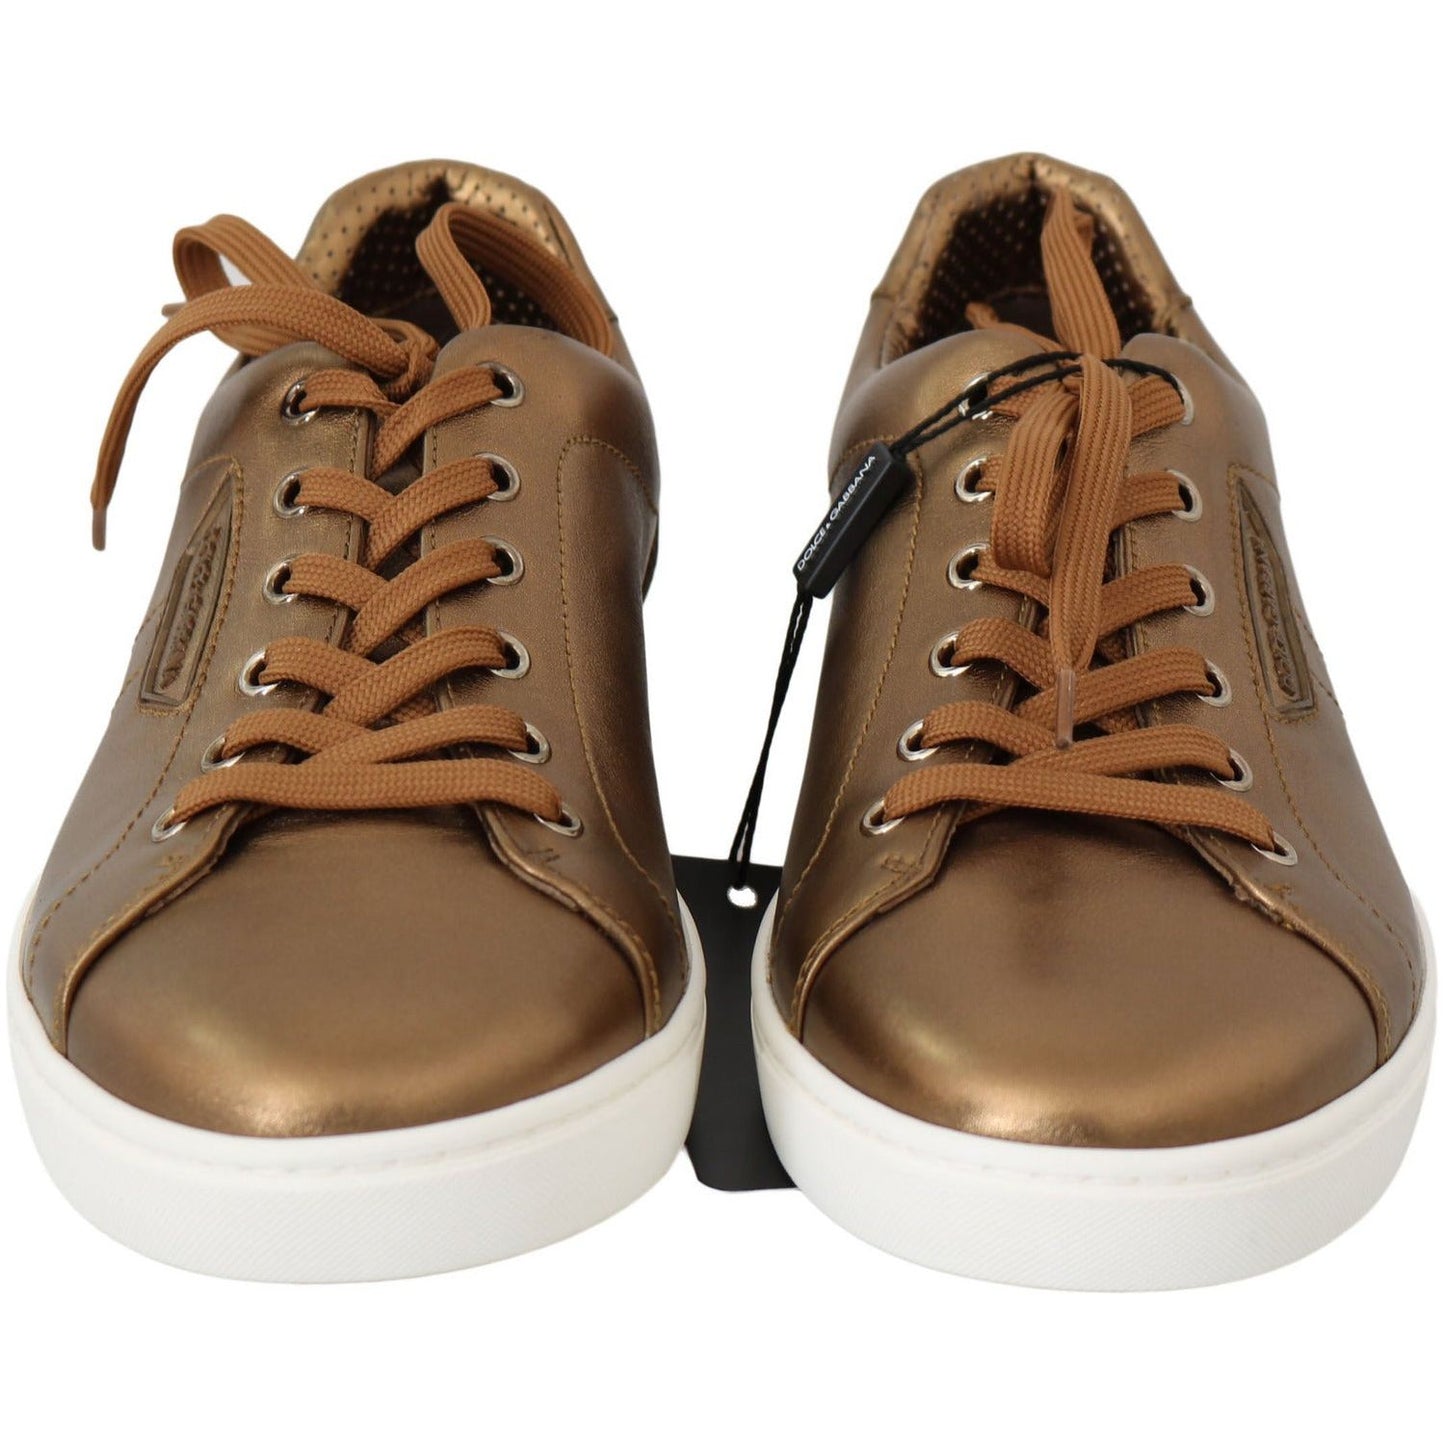 Dolce & Gabbana Golden Metallic Leather Sneakers gold-leather-mens-casual-sneakers